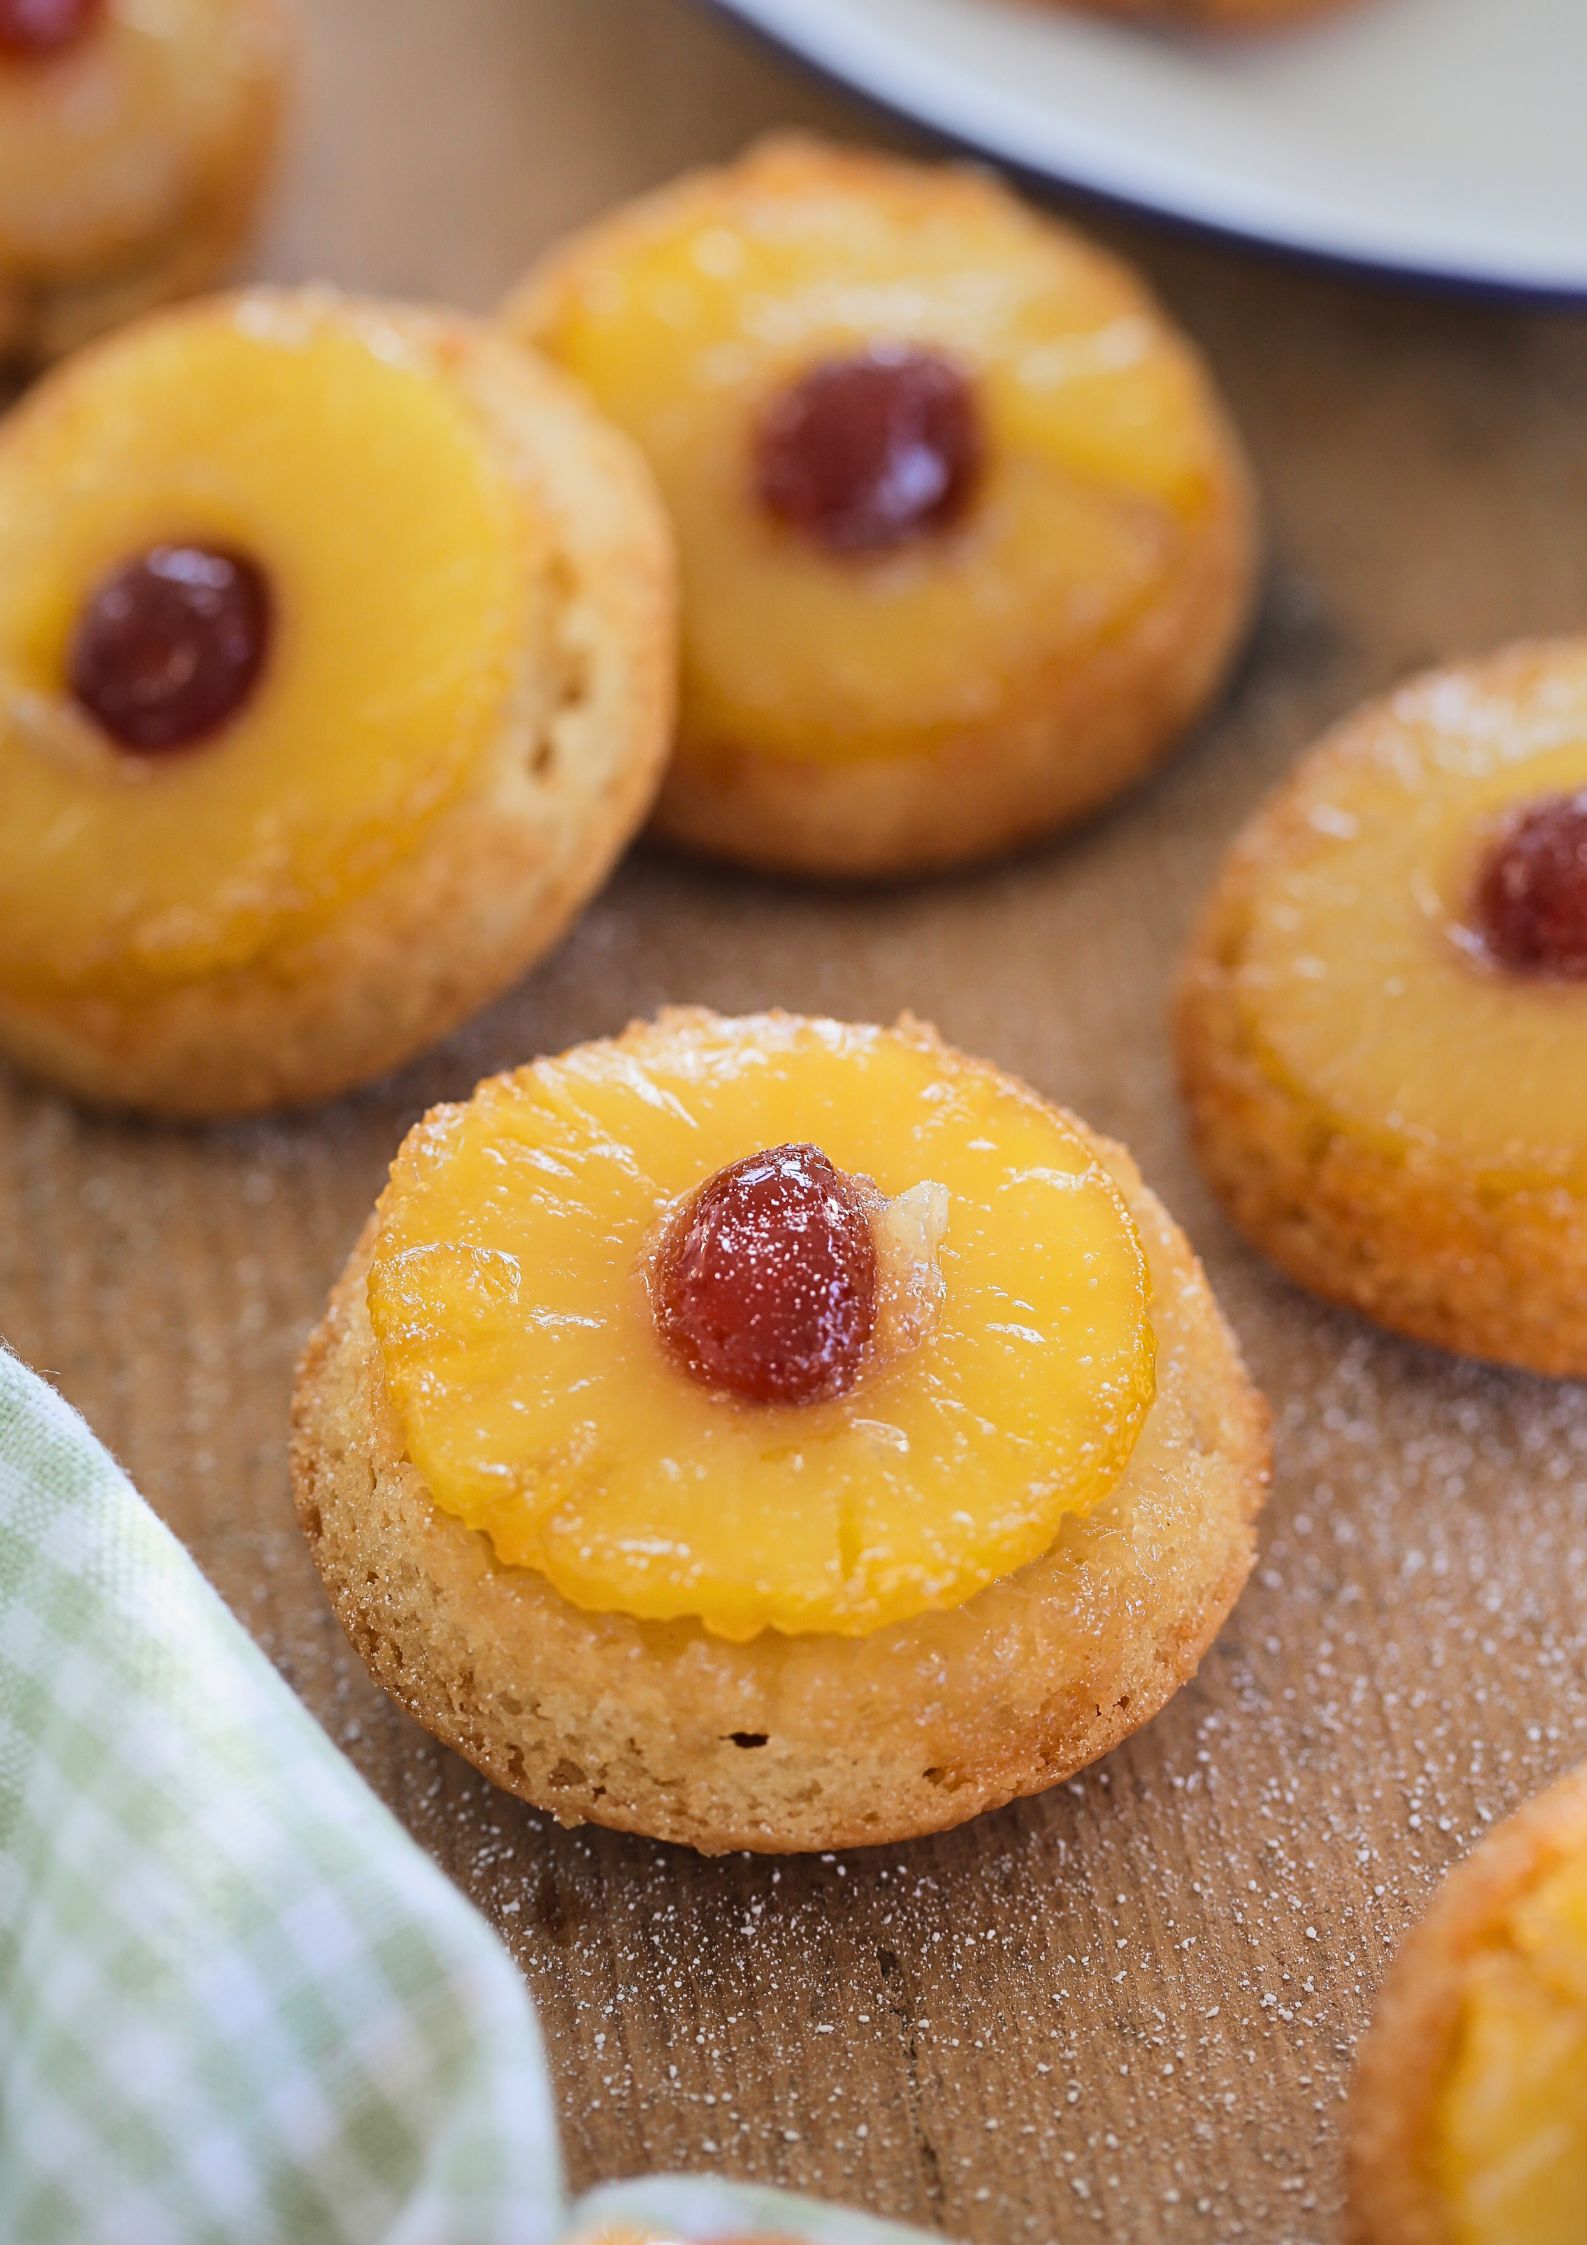 A classic for a reason, these mini vegan pineapple upside down cakes still have that sugary caramel crust, fruity pineapple, amber cherries and the easiest vegan cake mix! #pineappleupsidedowncake #pineapplecake #vegancake #eggfreecake #pineapplerecipes